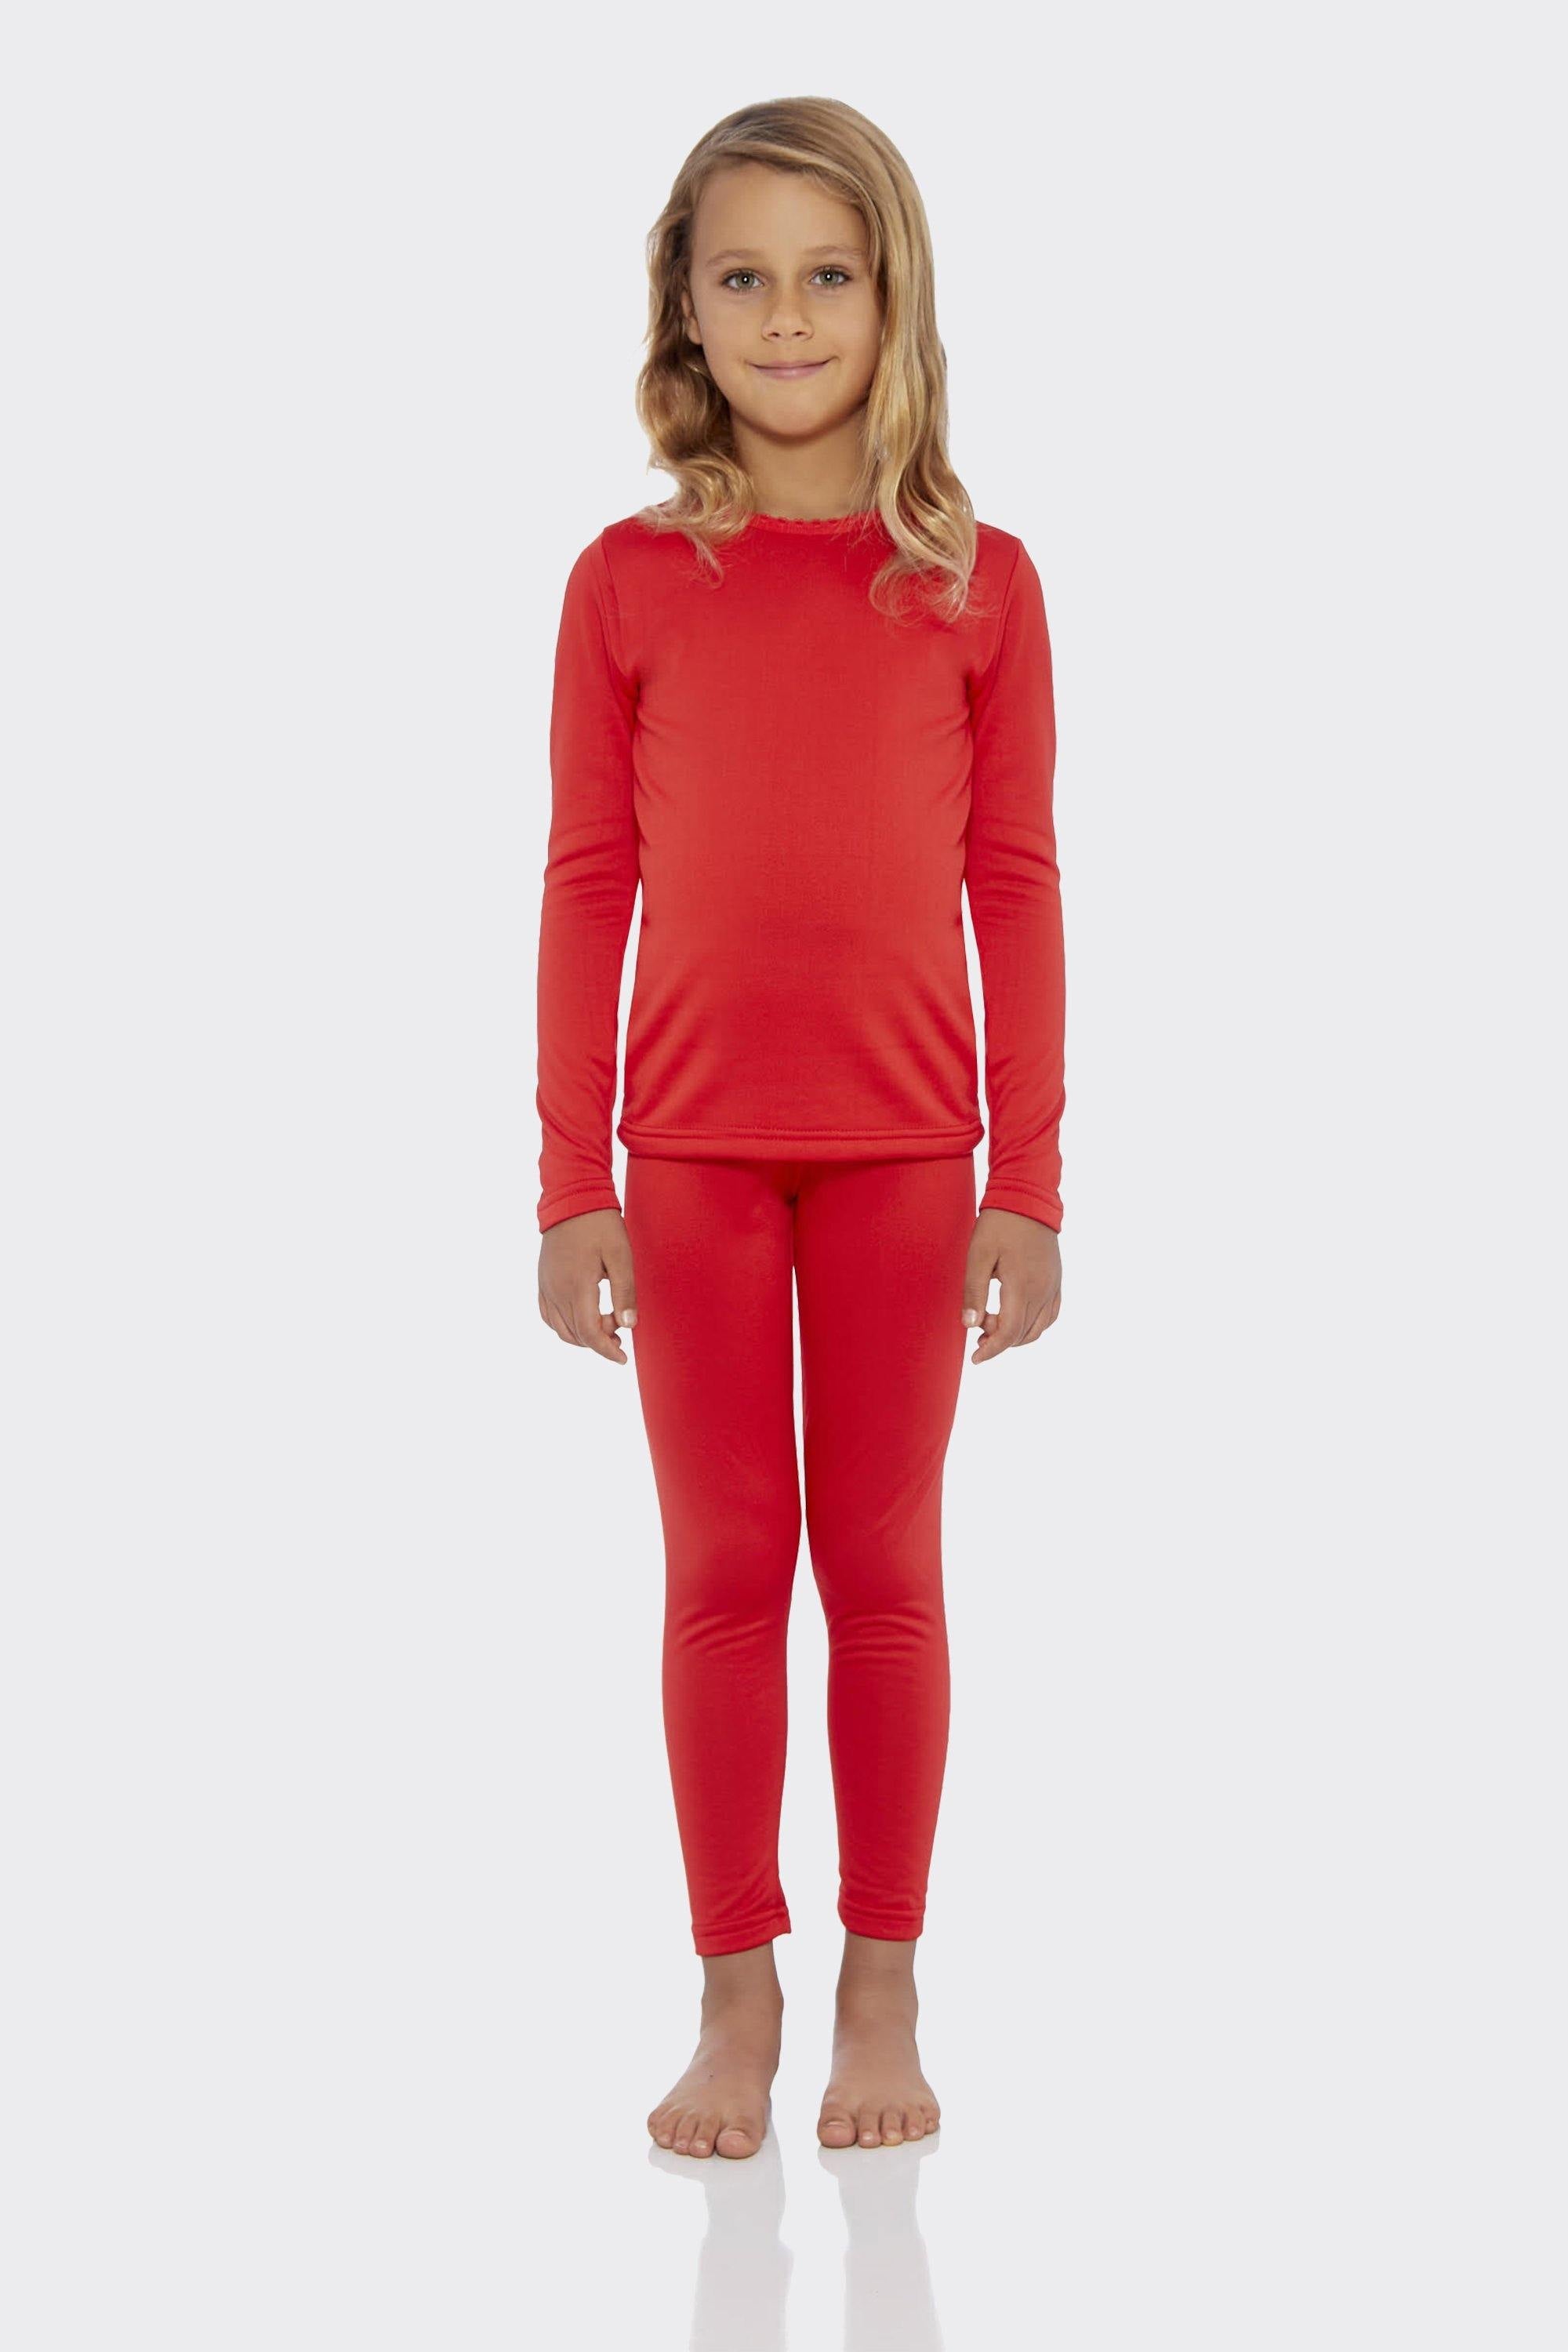 Rocky Thermal Underwear for Girls Thermal Long Johns Kuwait